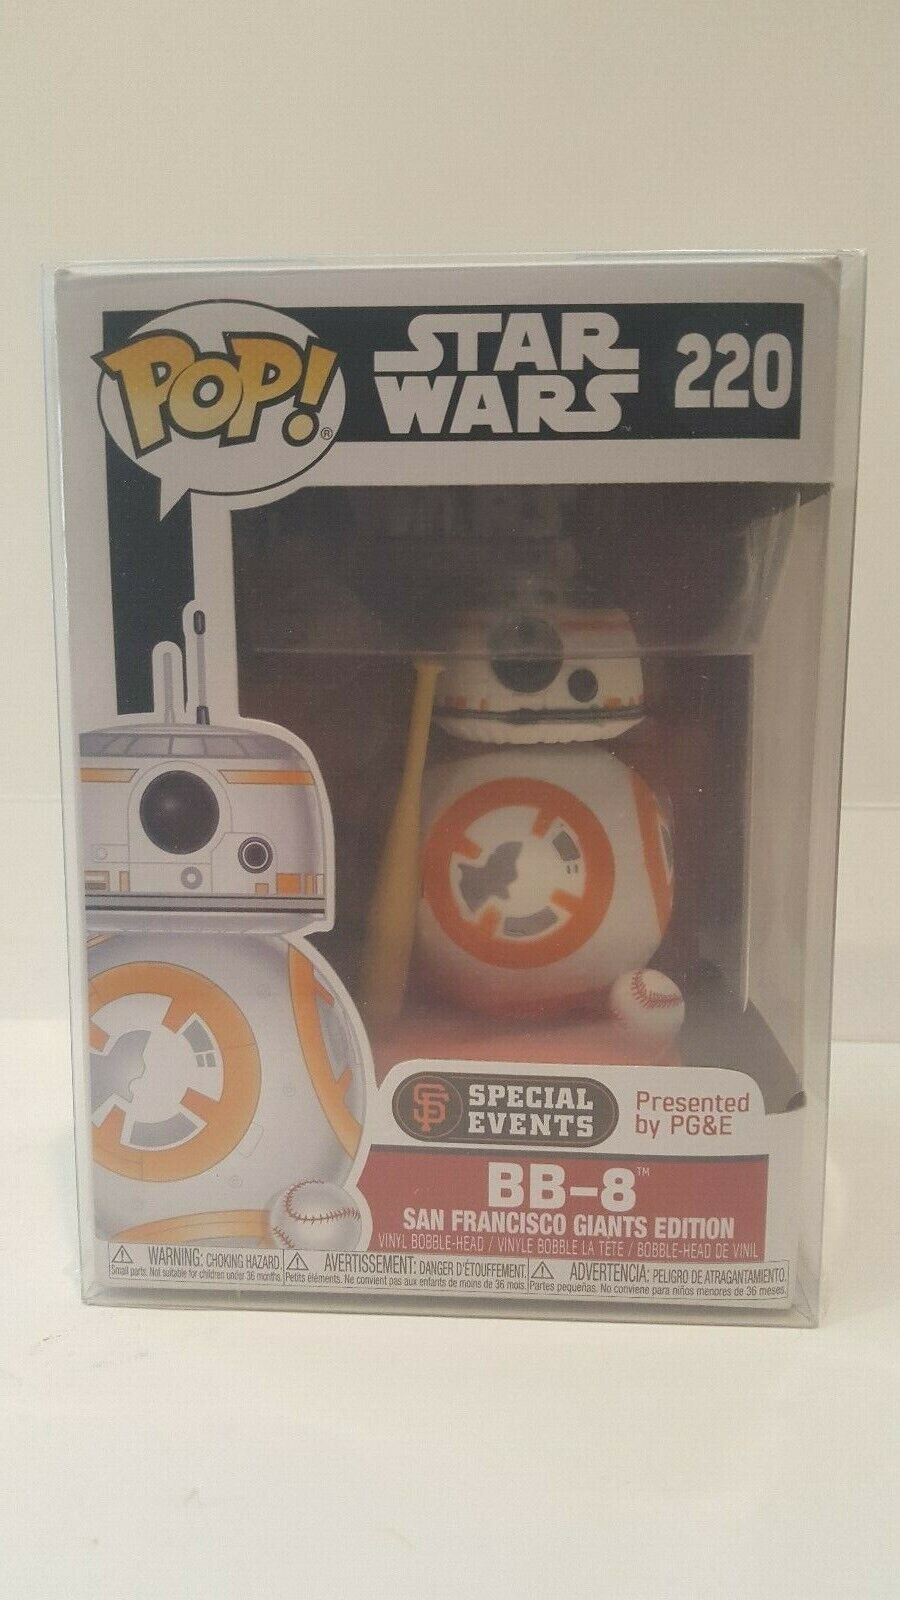 2017 SAN FRANCISCO GIANTS FUNKO POP STAR WARS DAY BB-8 SPECIAL EVENT EXCLUSIVE 